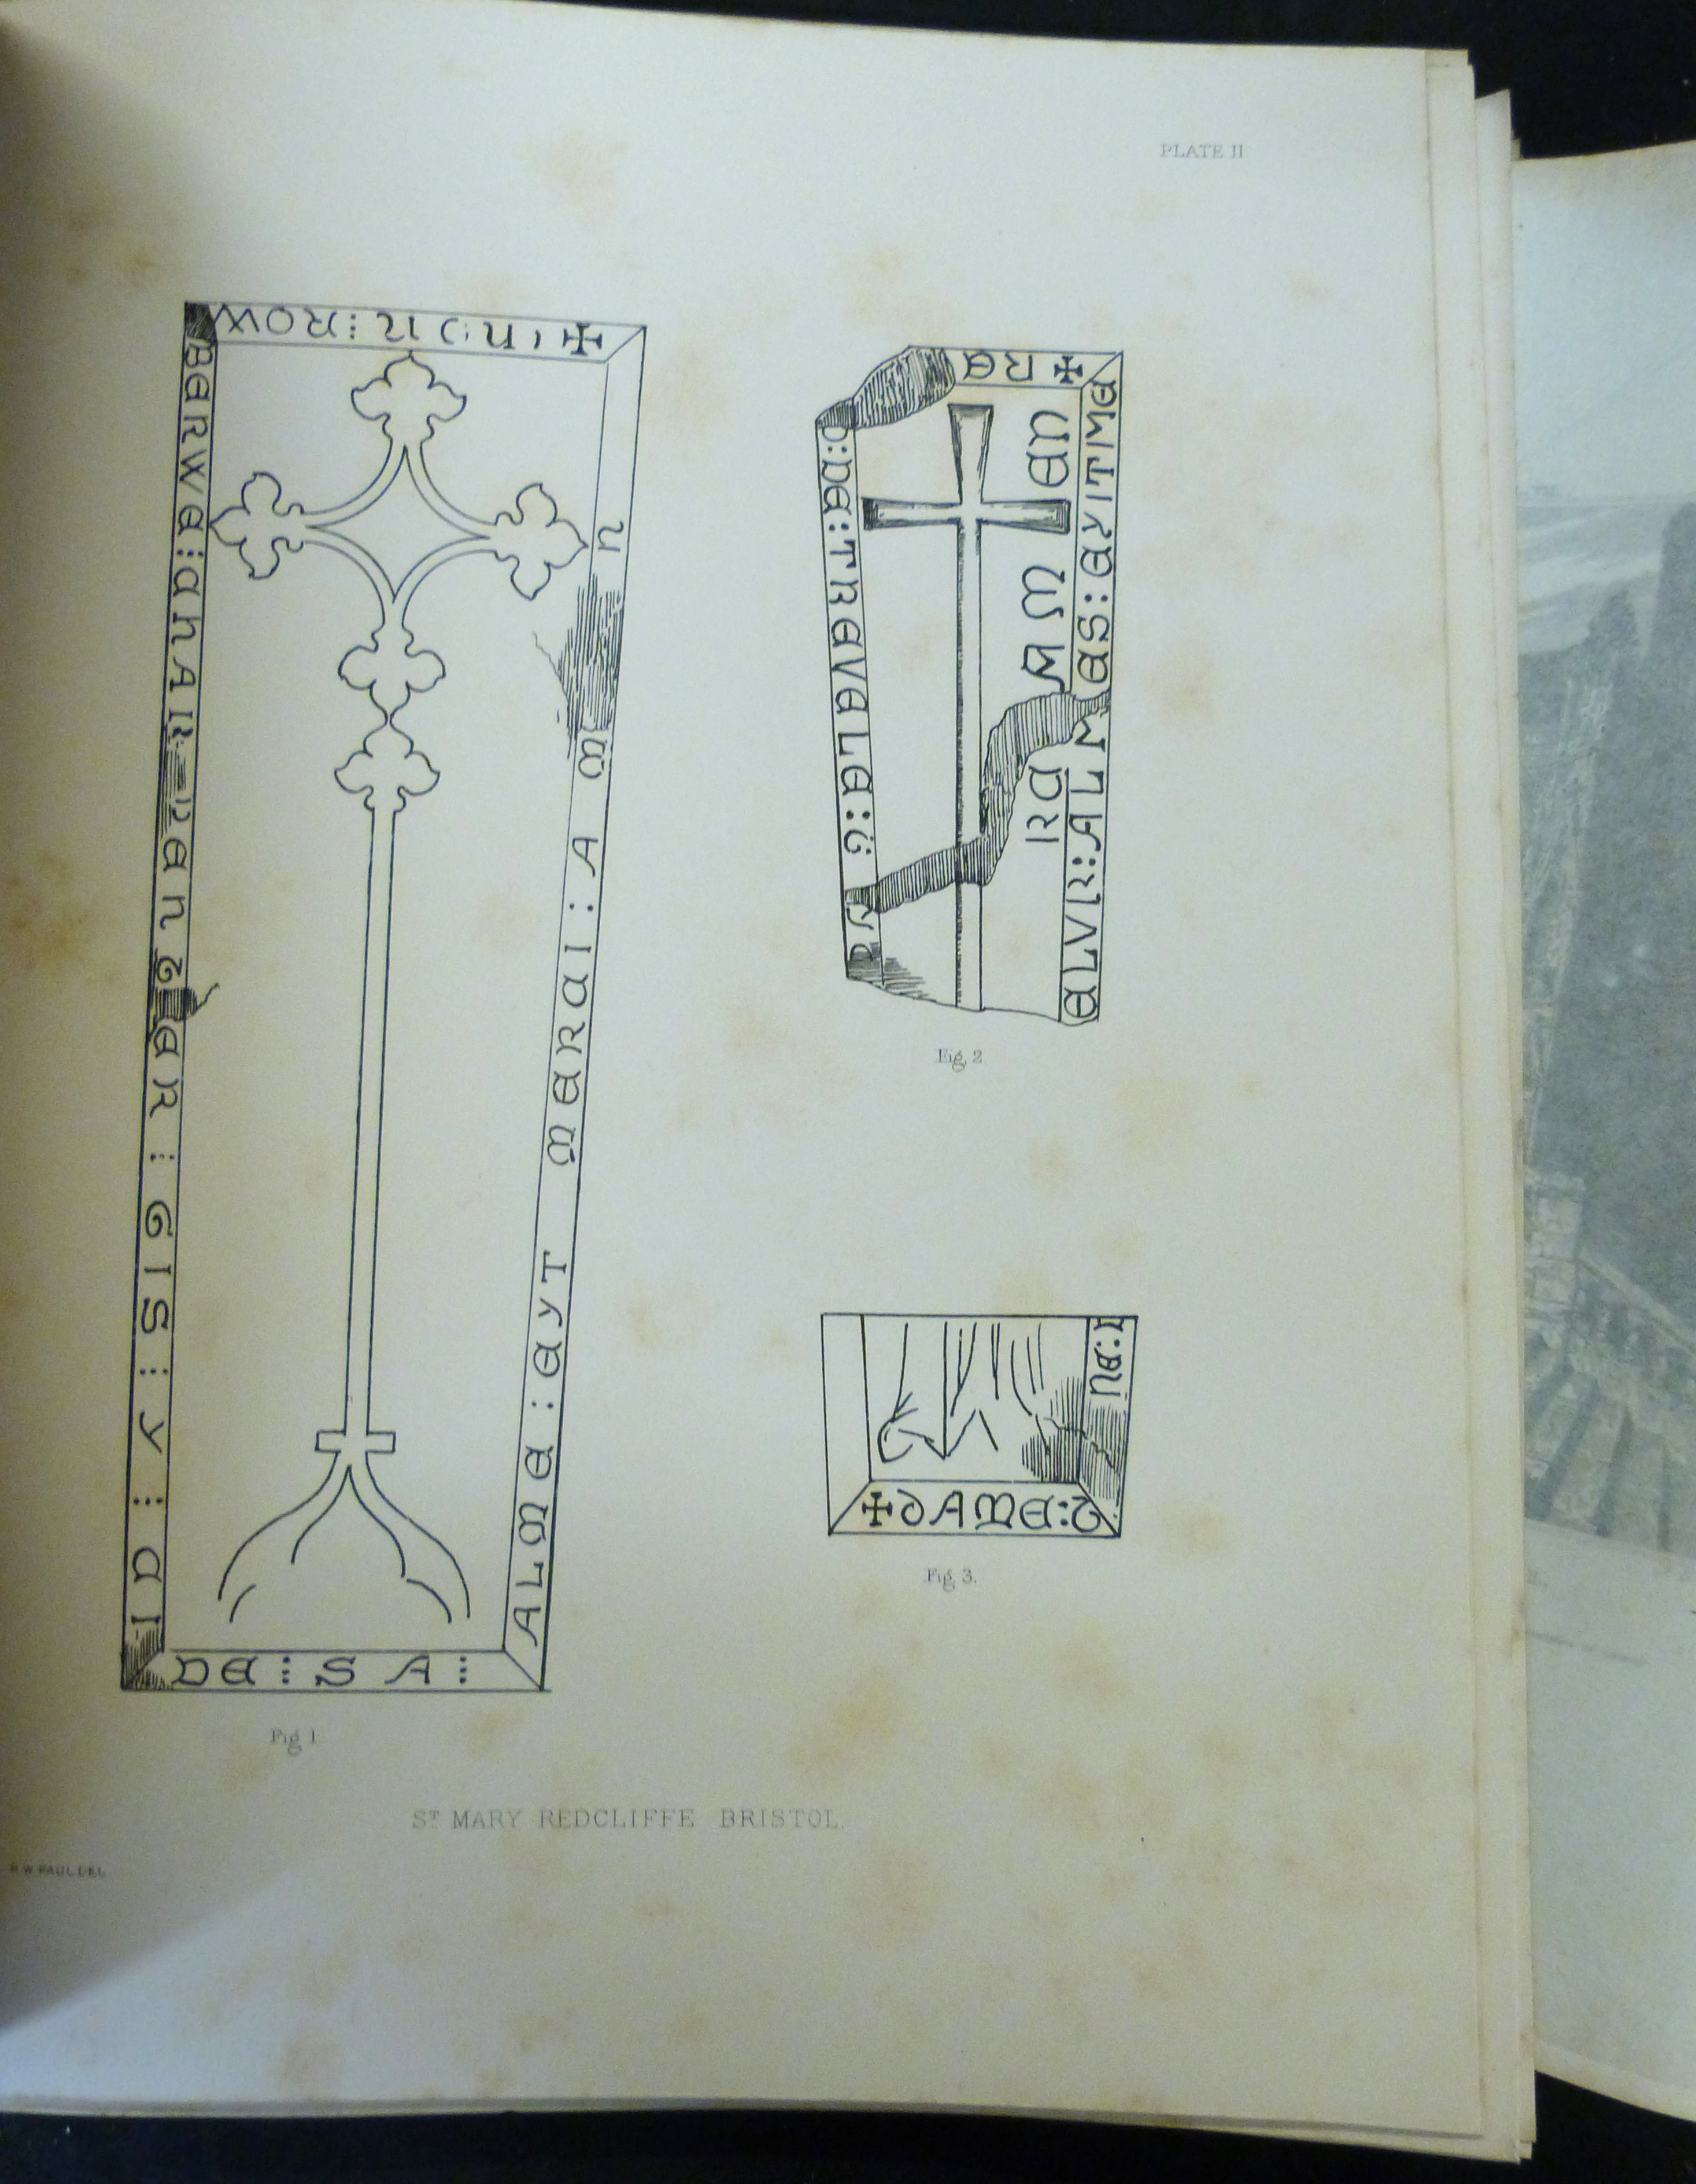 ROLAND WILMOT PAUL: AN ACCOUNT OF SOME OF THE INCISED AND SEPULCHRAL SLABS OF NORTH-WEST - Image 4 of 4